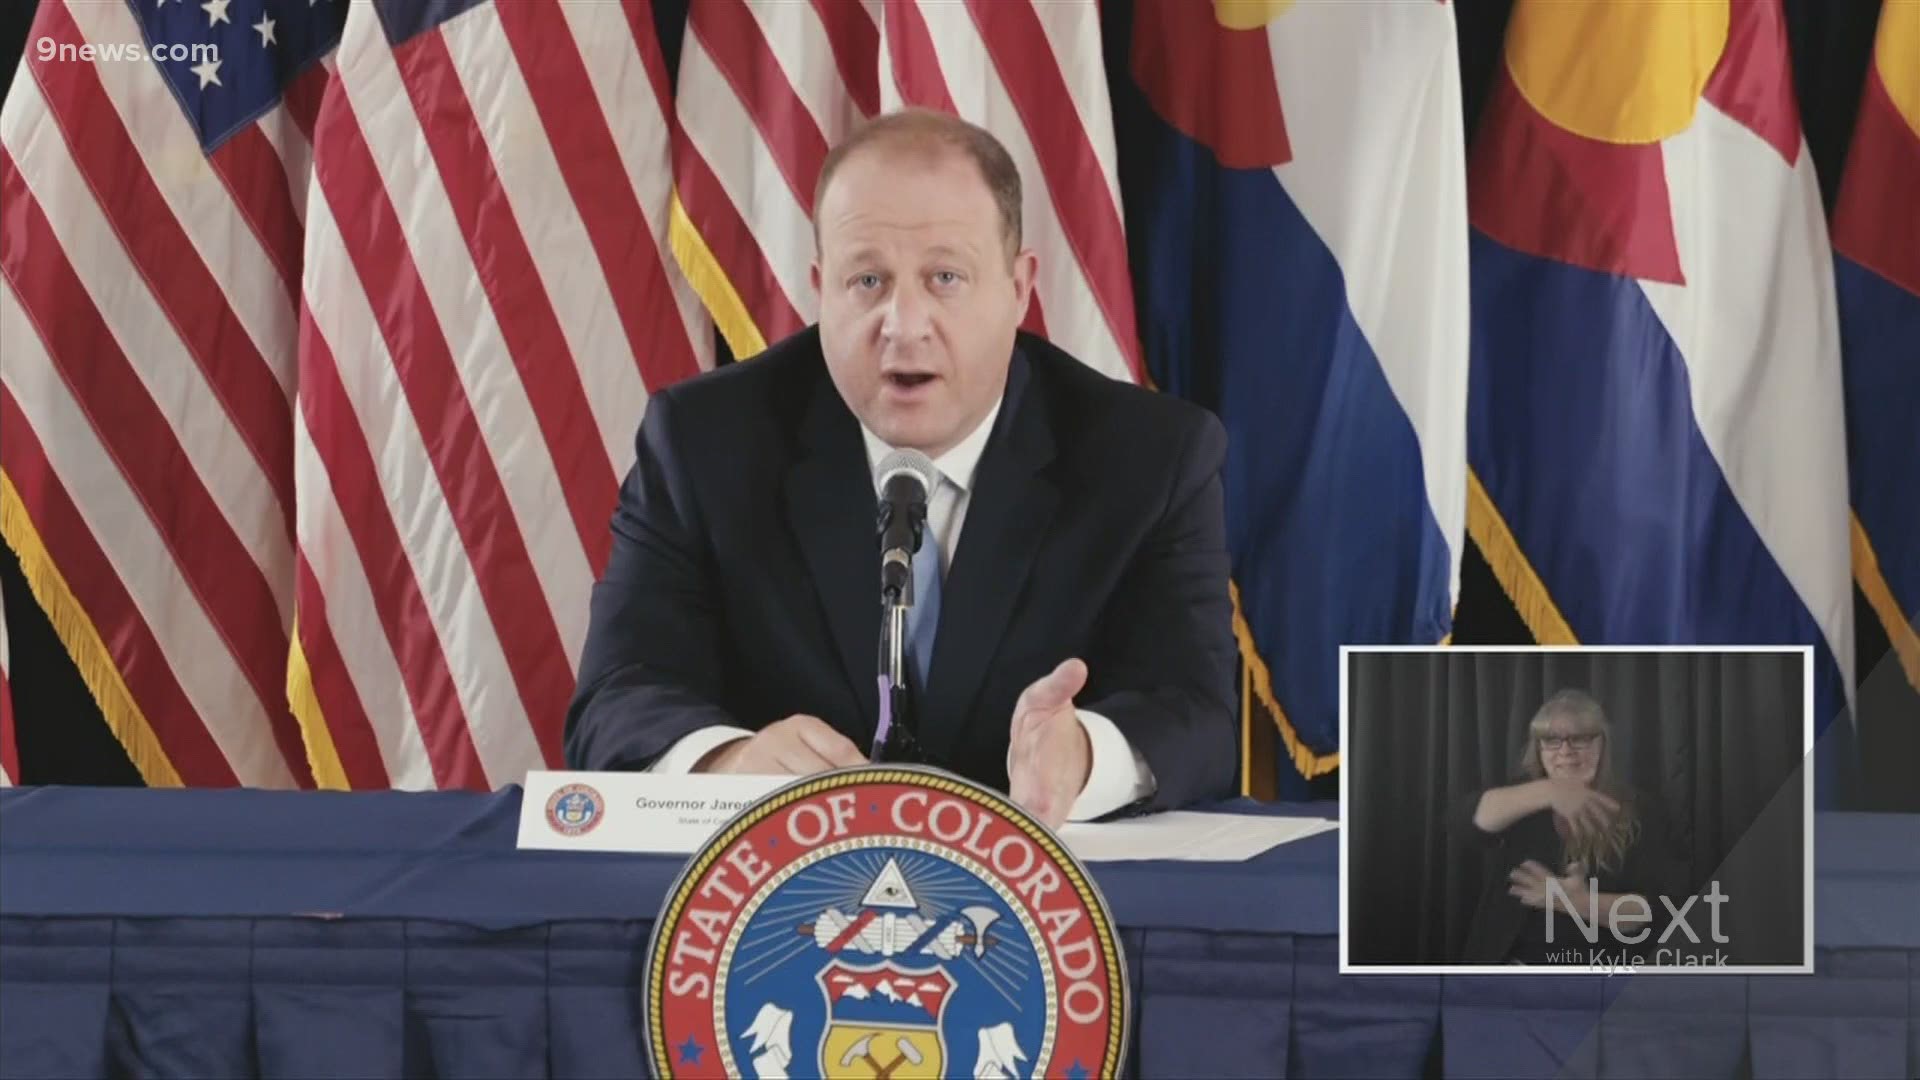 Gov. Polis said social distancing is a numbers game and most Coloradans are helping the state win, despite what happened at Boulder Creek.